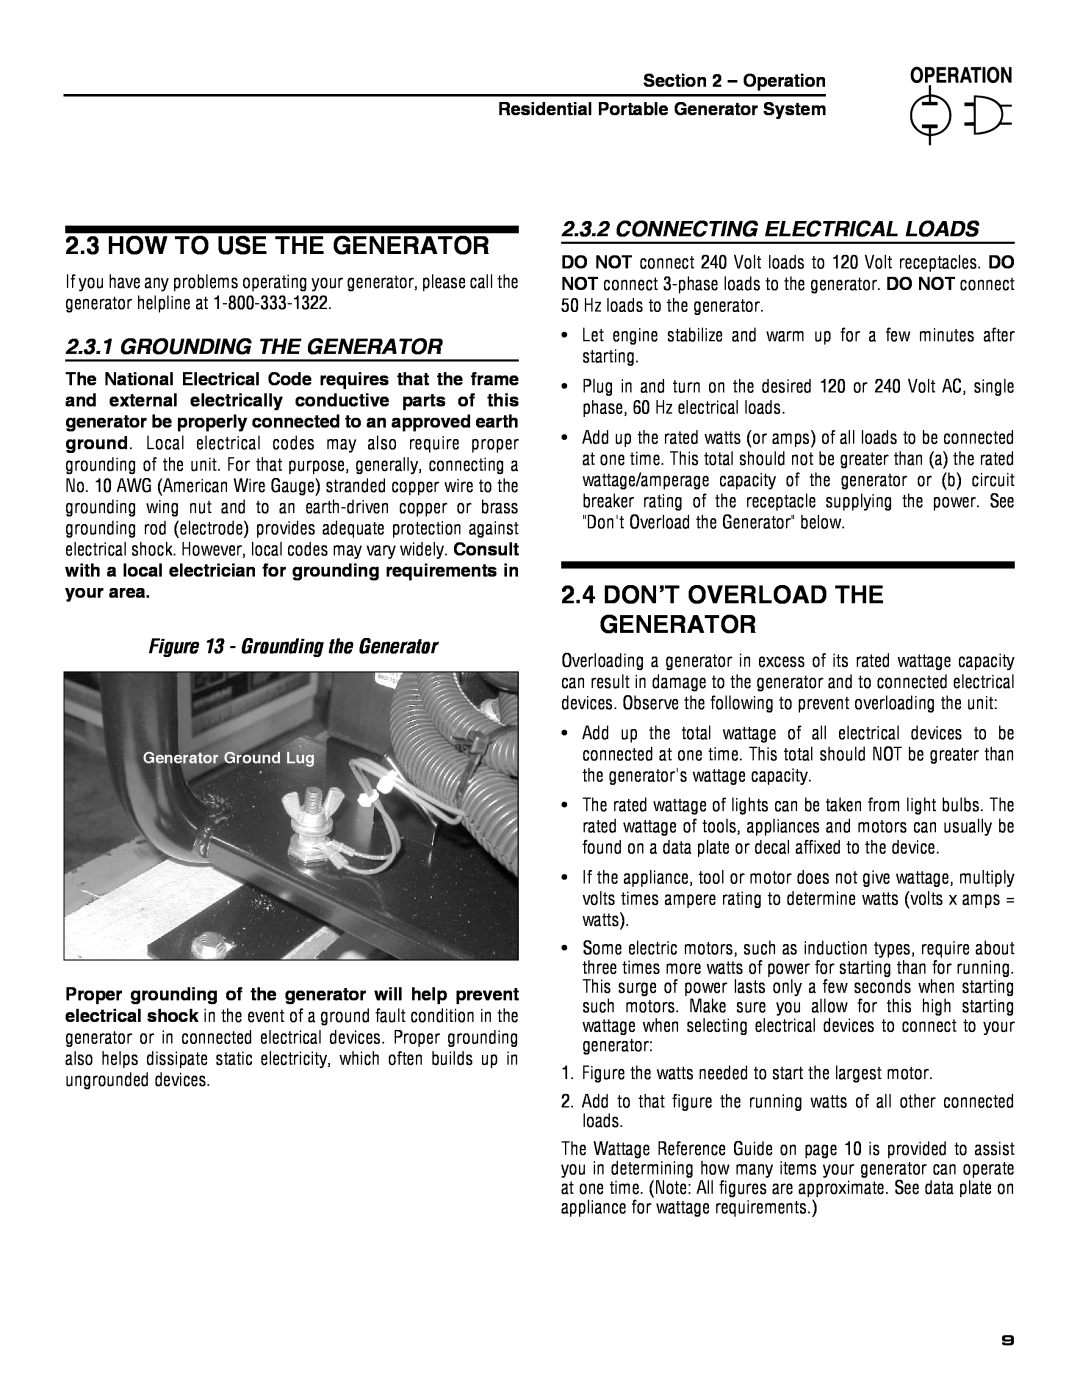 Guardian Technologies 5209 owner manual How To Use The Generator, 2.4 DON’T OVERLOAD THE GENERATOR, Grounding The Generator 